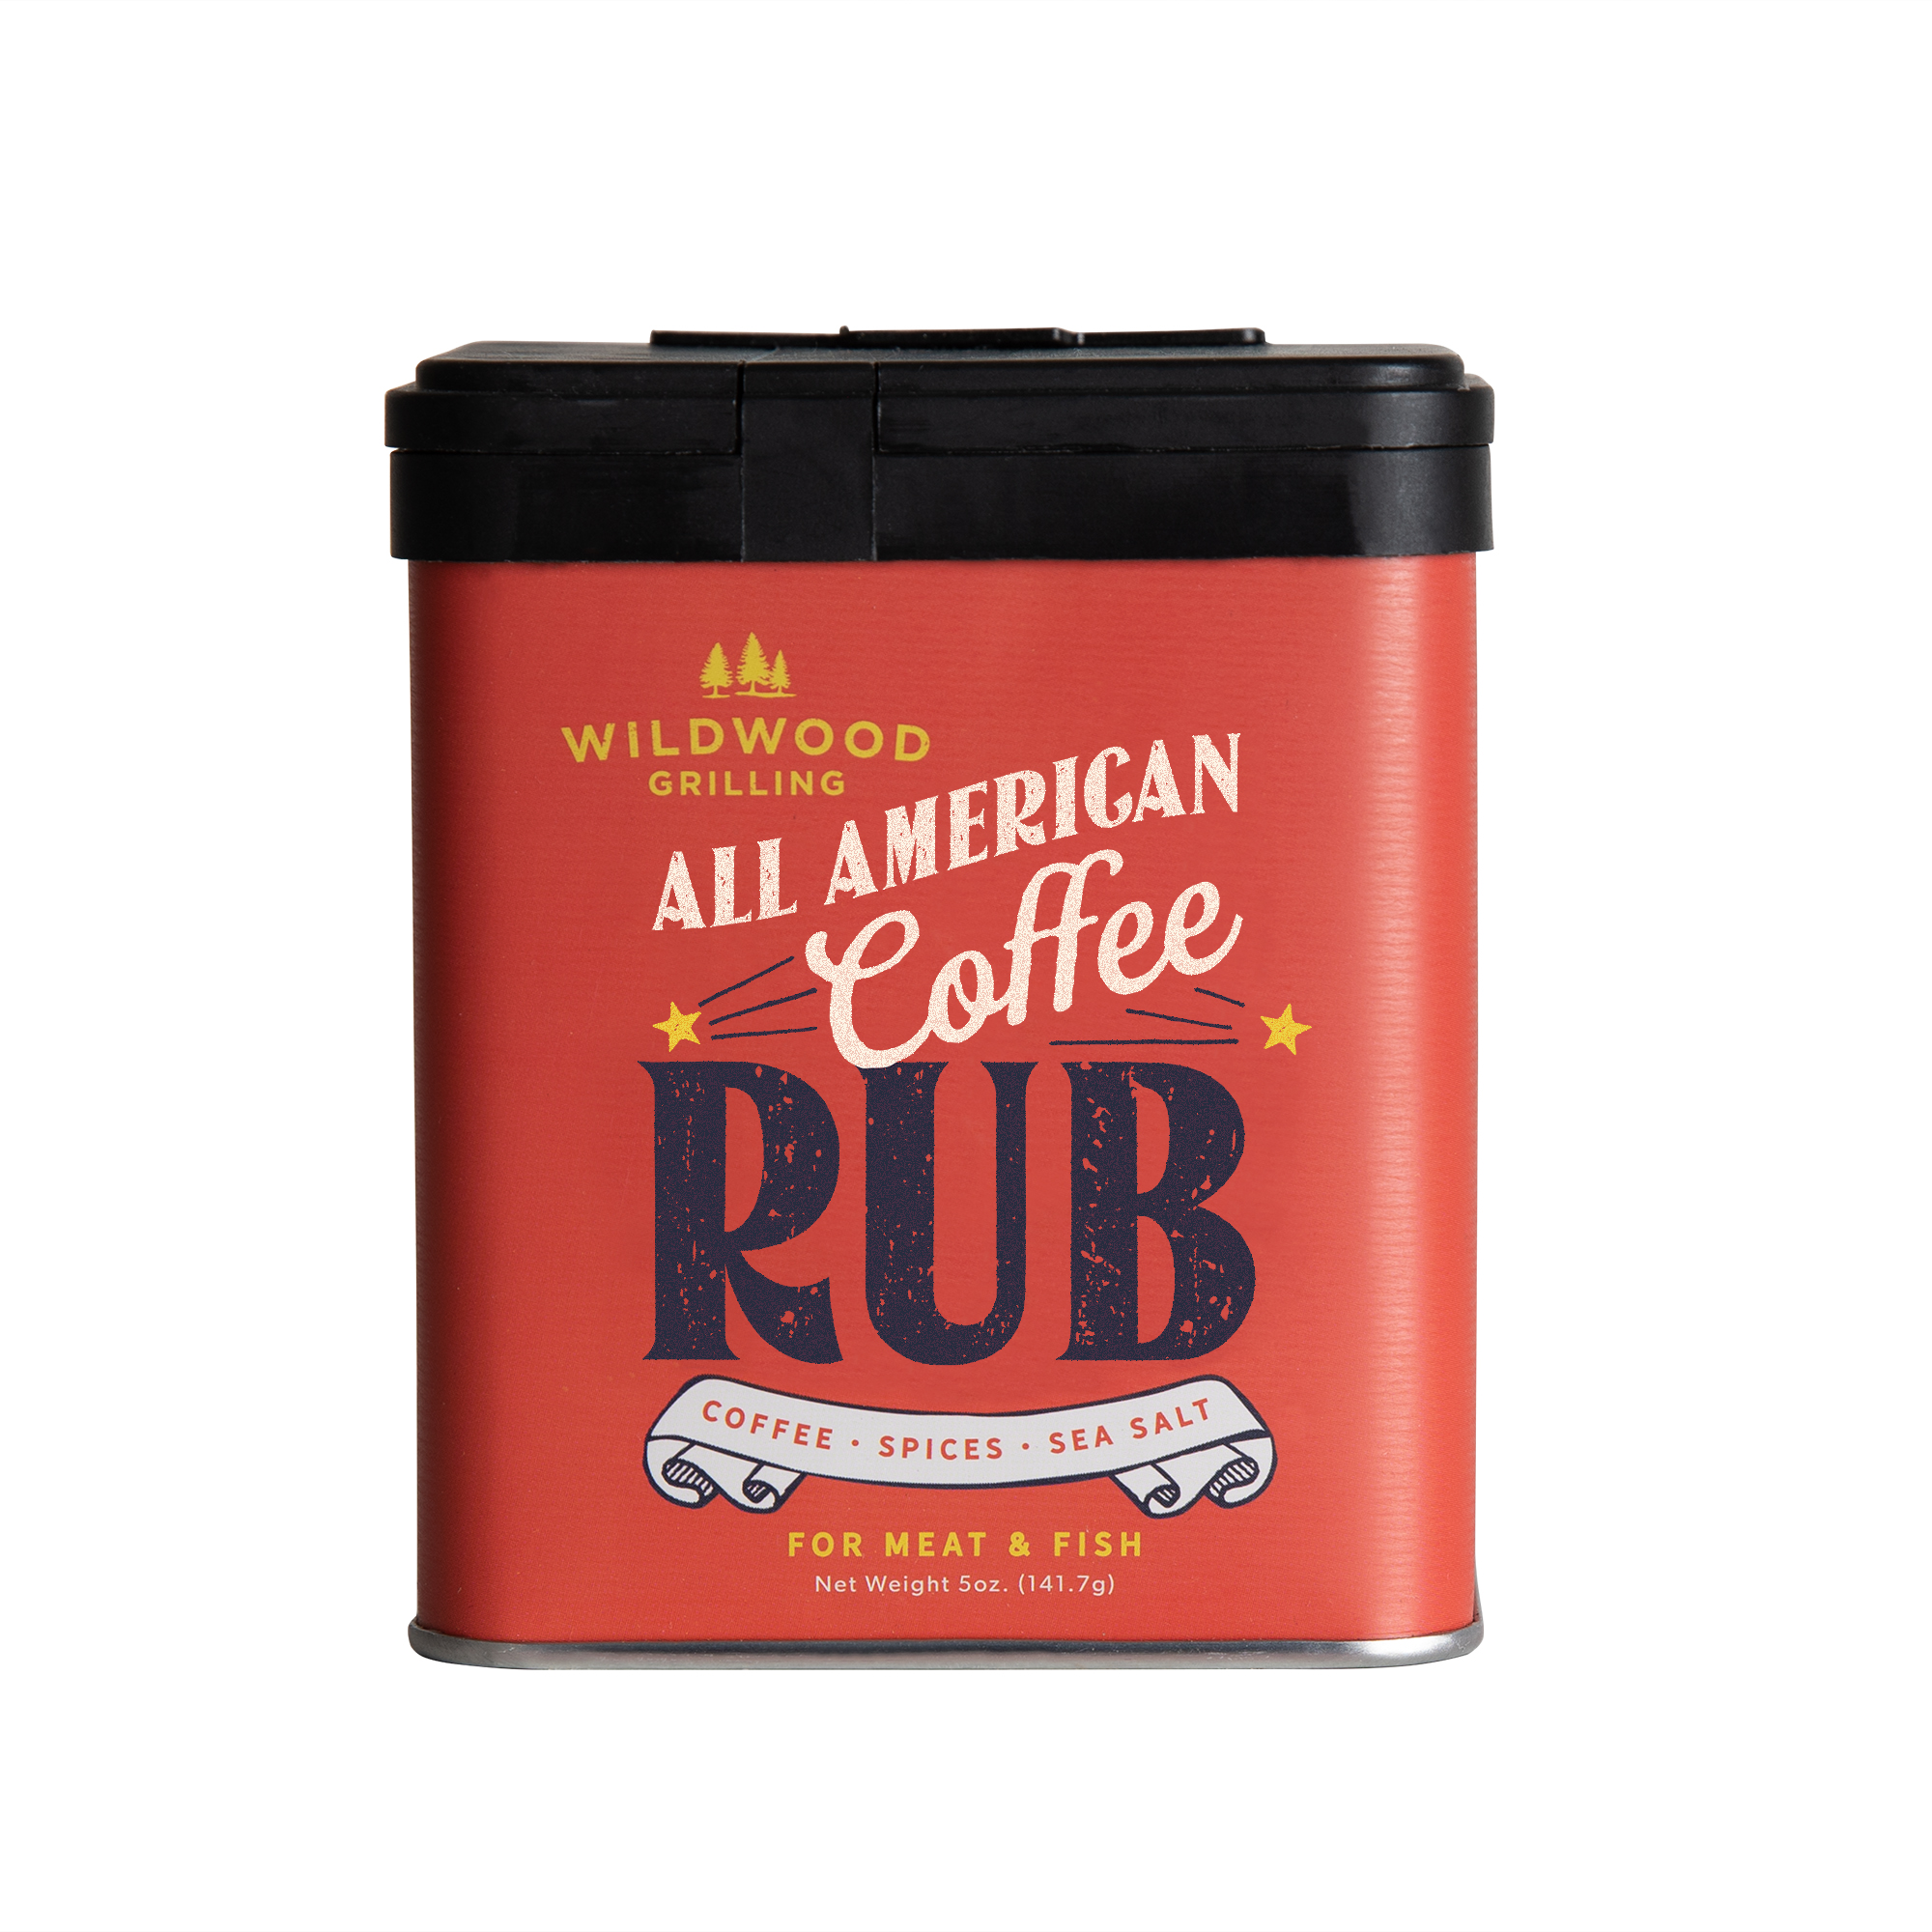 /assets/images/products/product-images/4DFBH2FBYFBFA/6480b66dc926d_AllAmericanCoffee.jpg